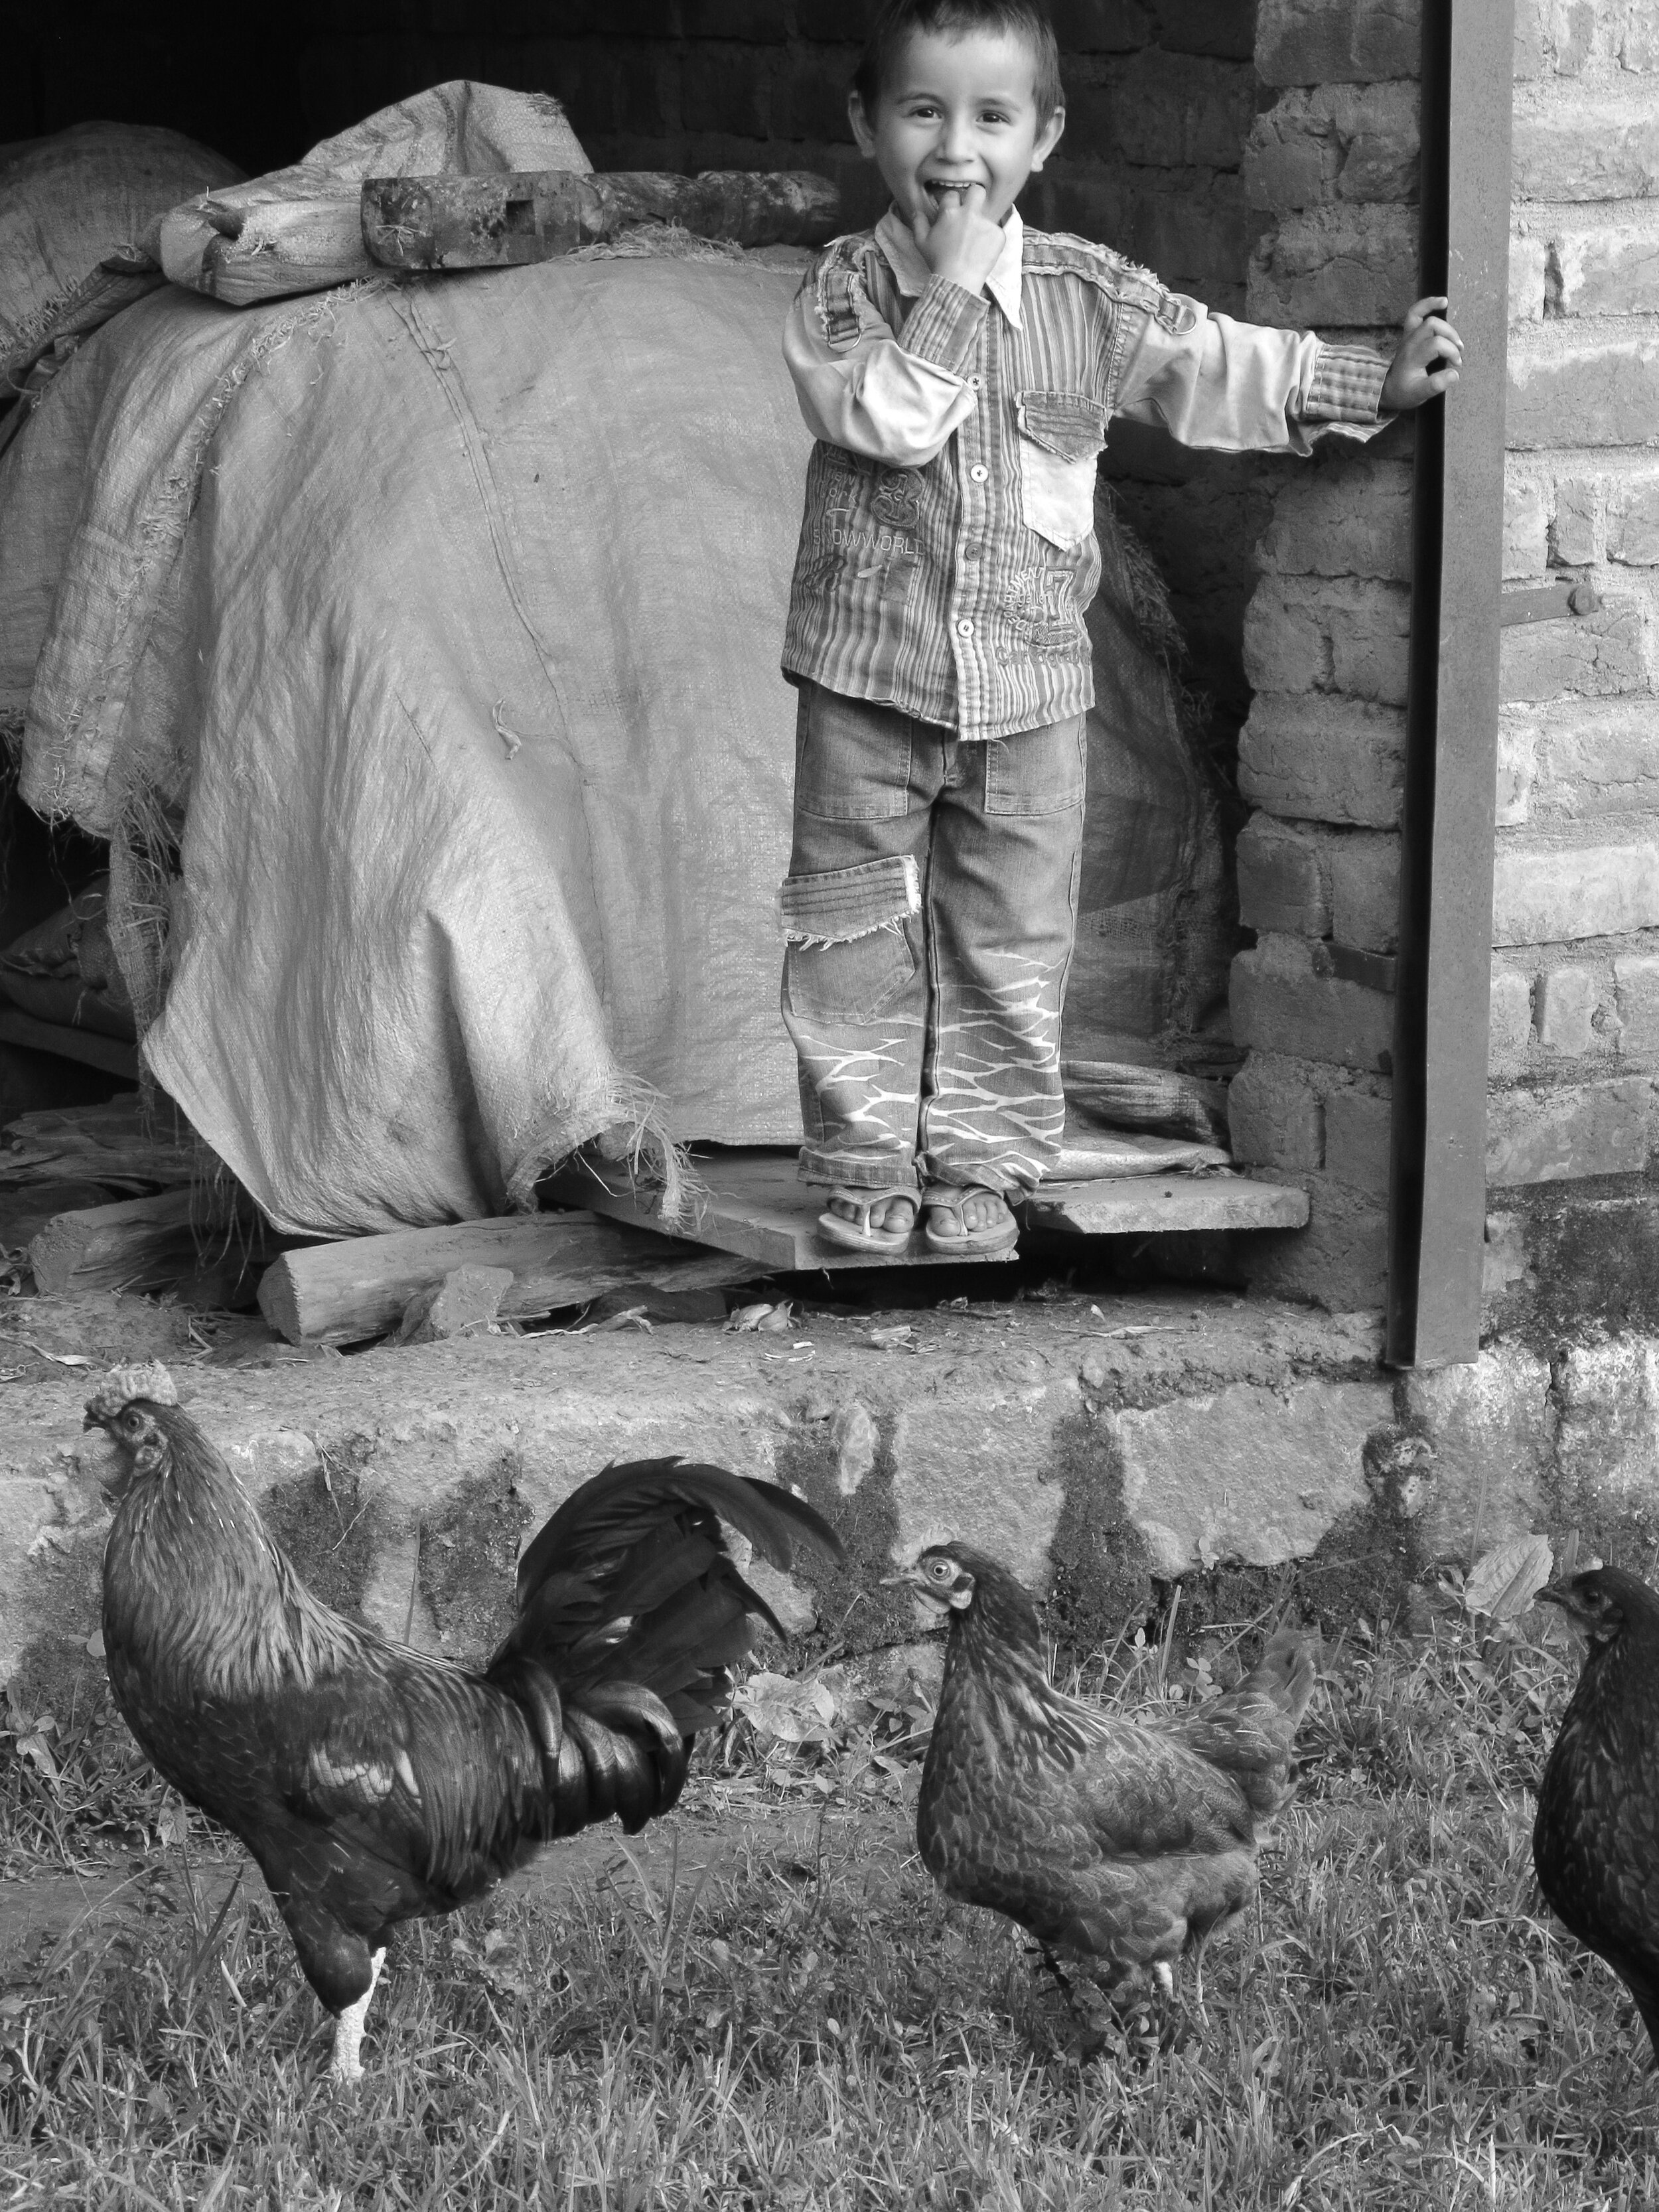 Boy and Chickens India 2011